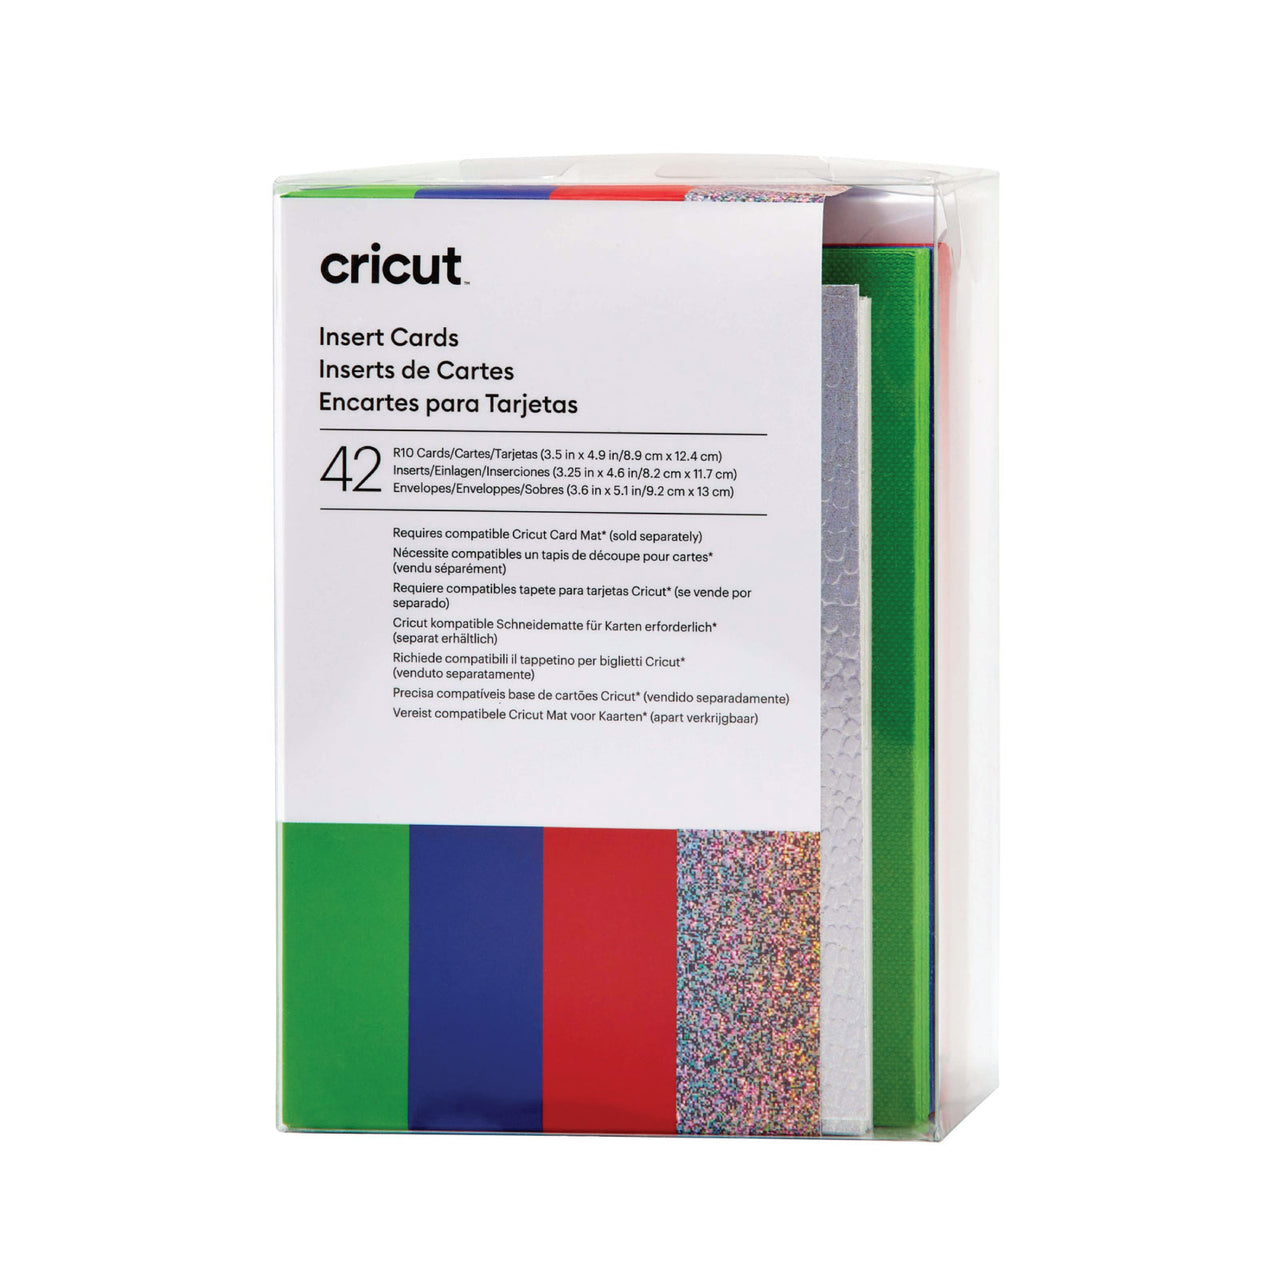 Cricut Insert Cards, Rainbow Scales Sampler - R10 (42 ct) - Damaged Package